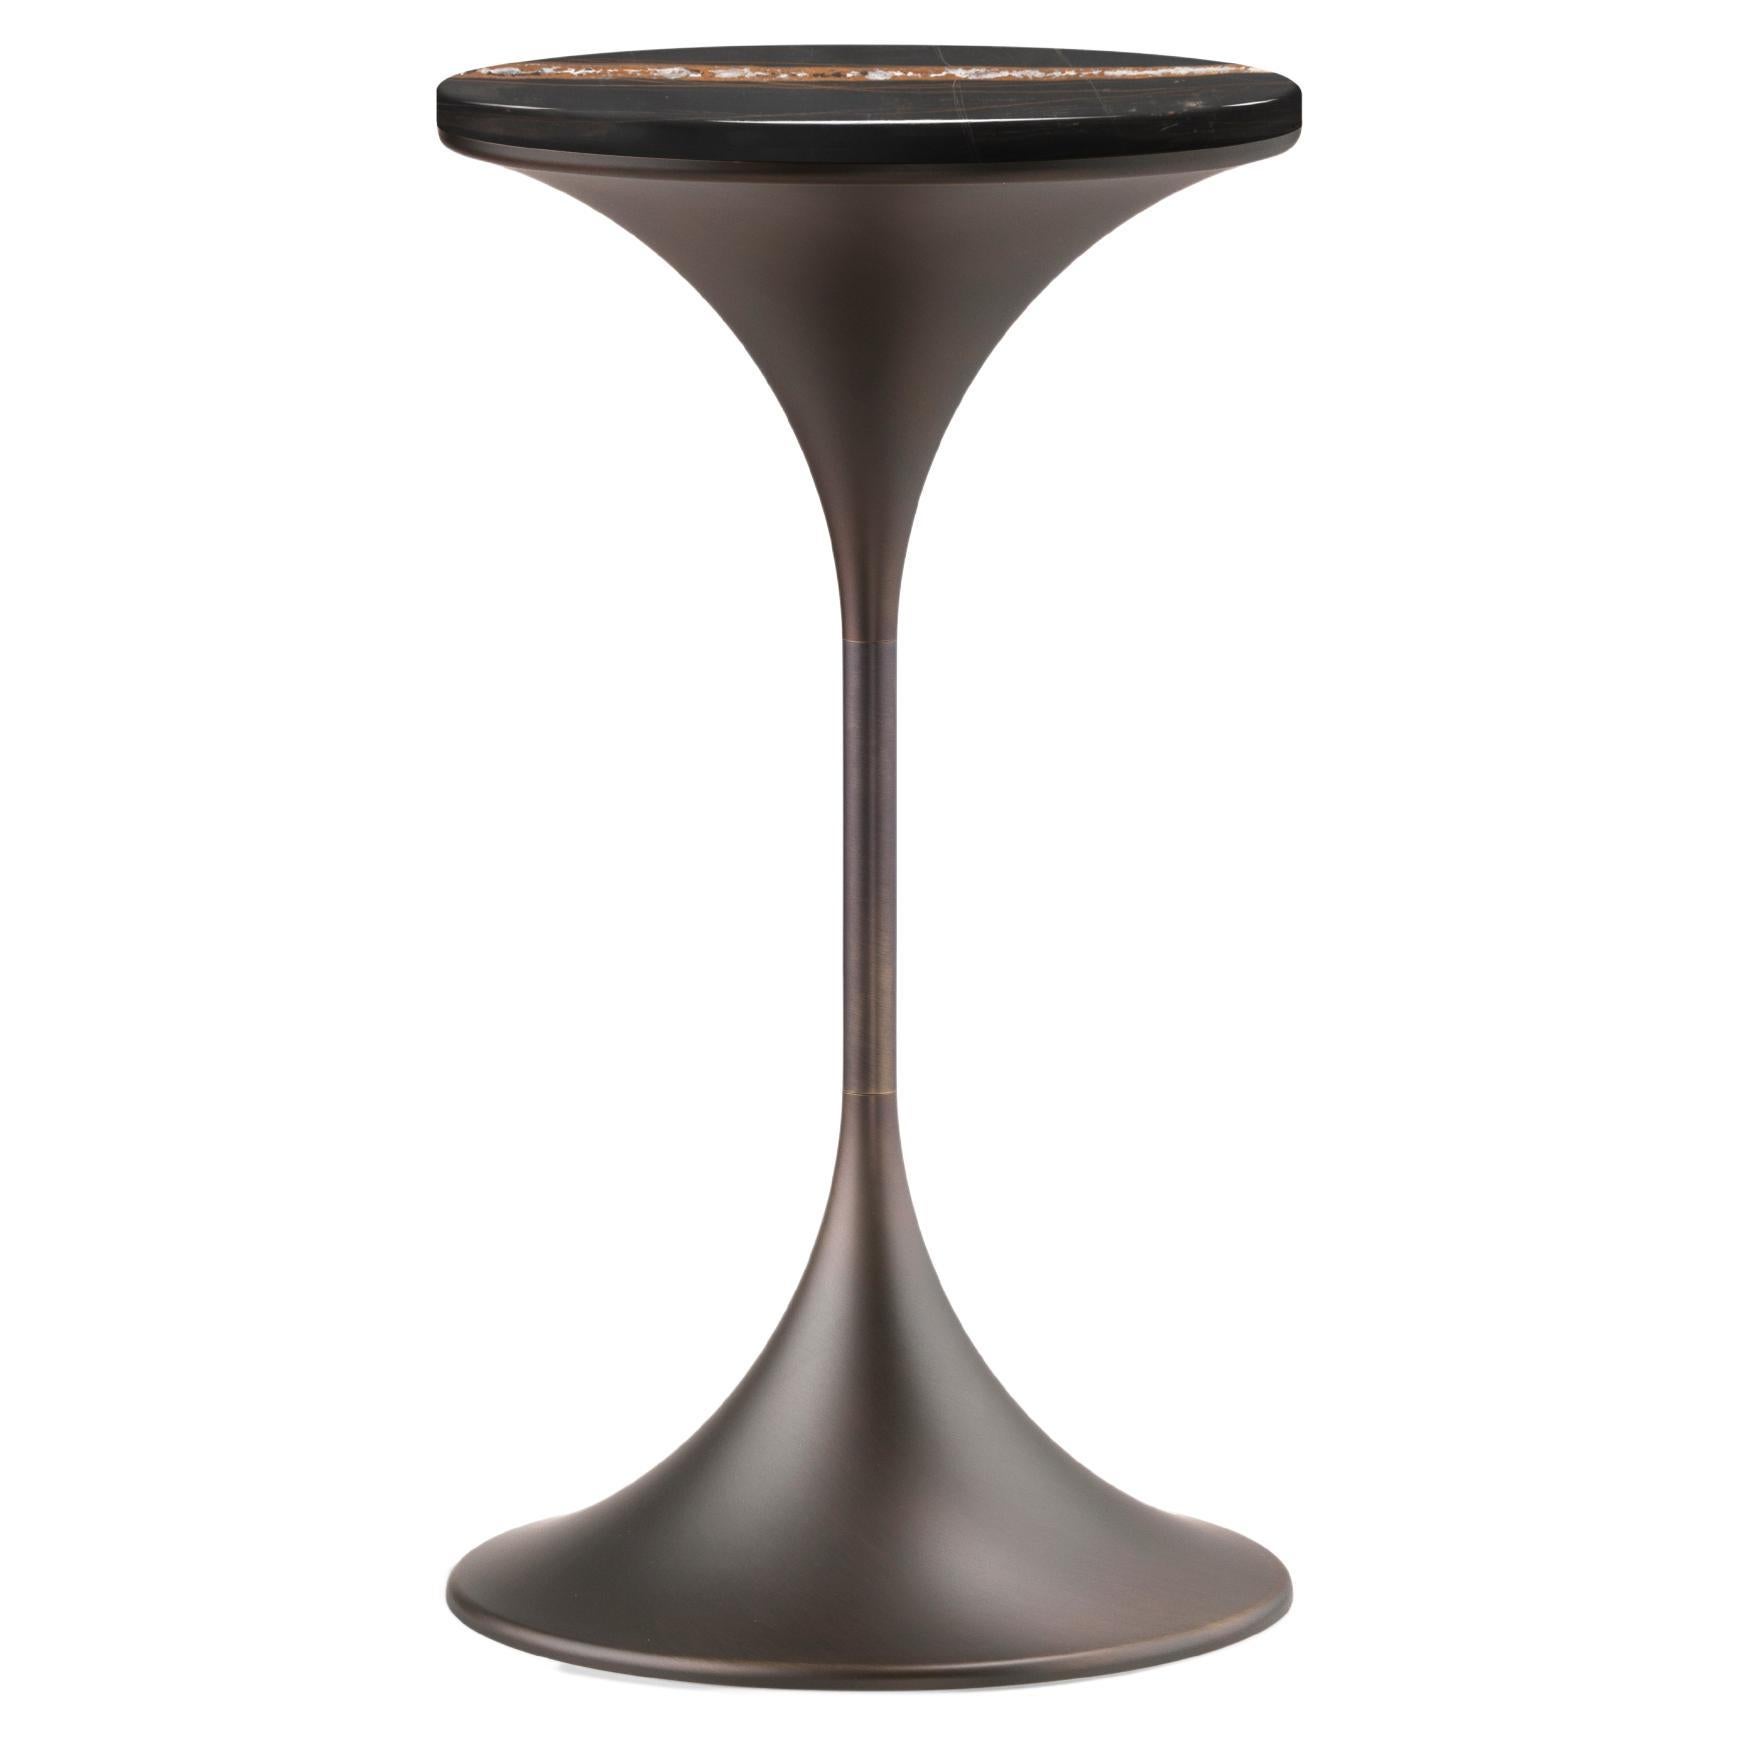 Dapertutto Tall Table, Sahara Noir Top, Burnished Brass , Made in Italy For Sale